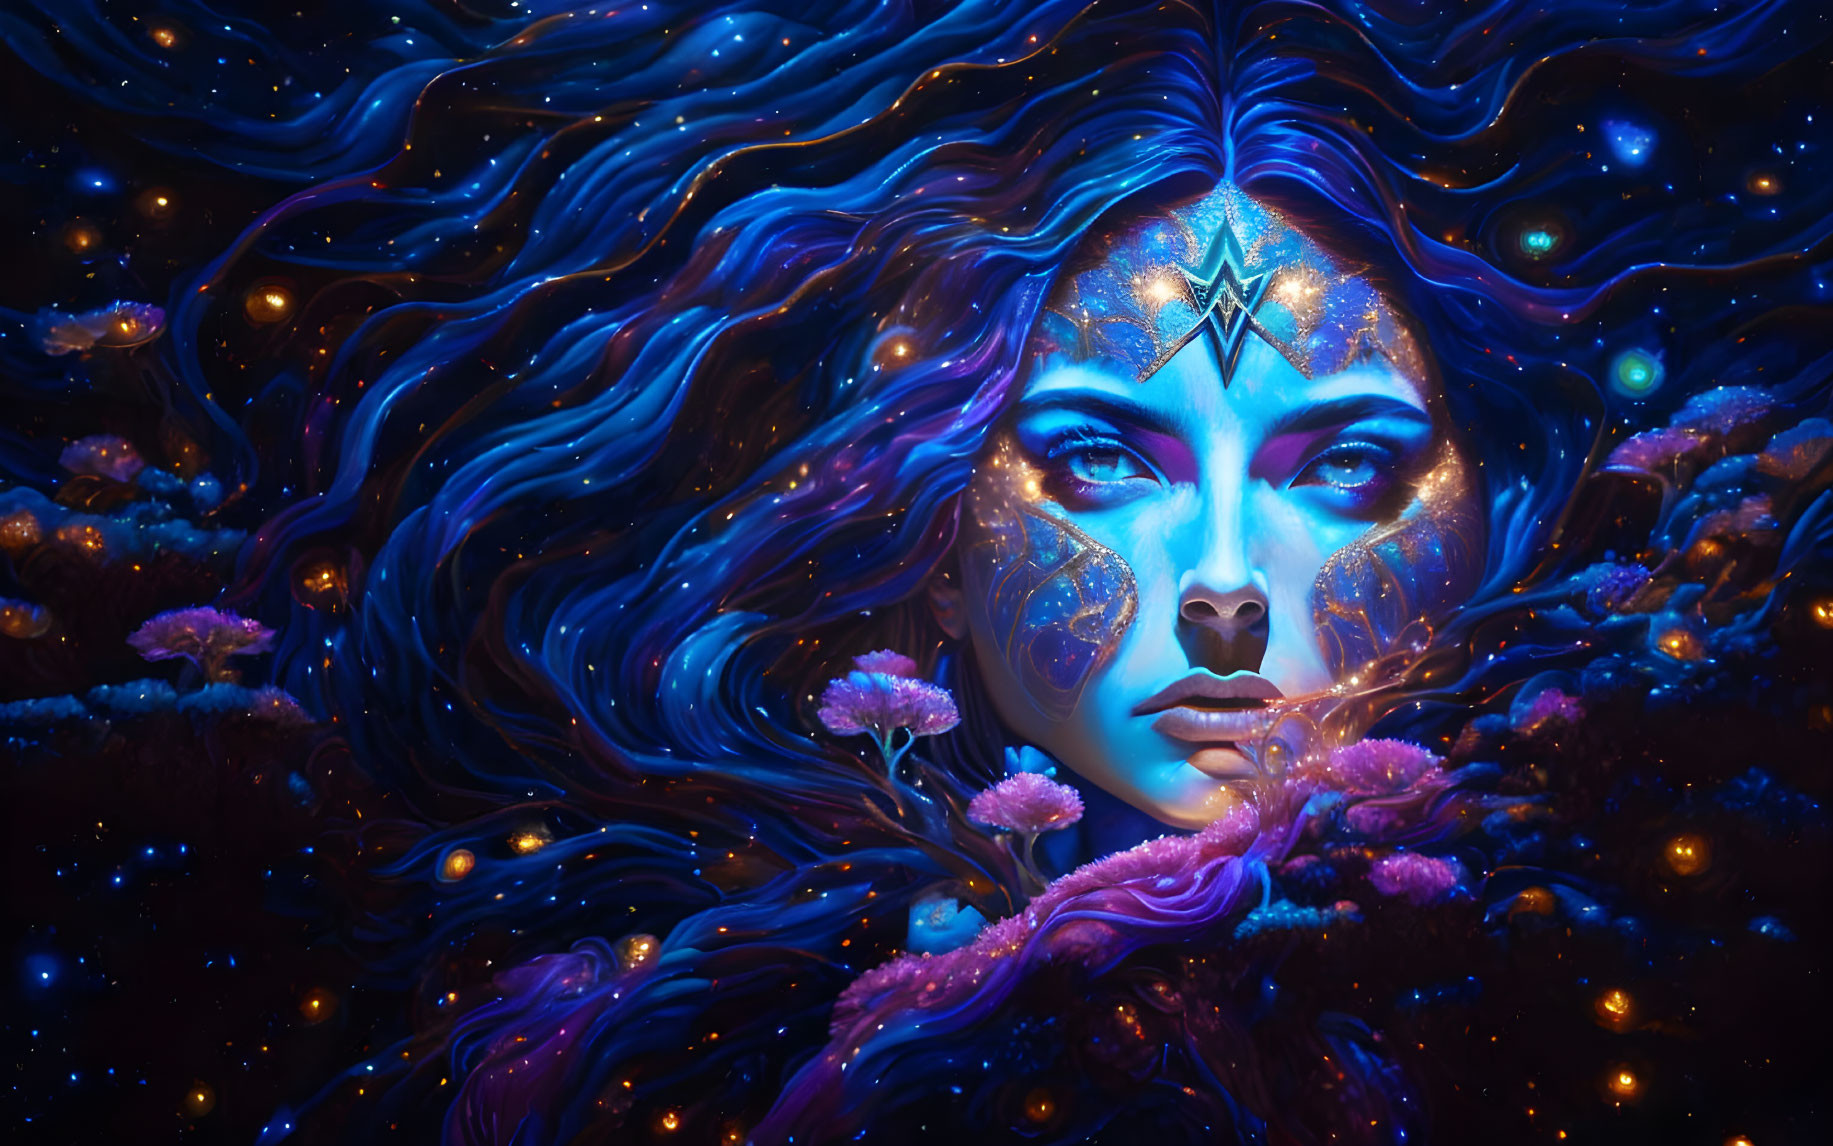 Colorful cosmic artwork of woman's face with flowing hair and galaxies and celestial patterns